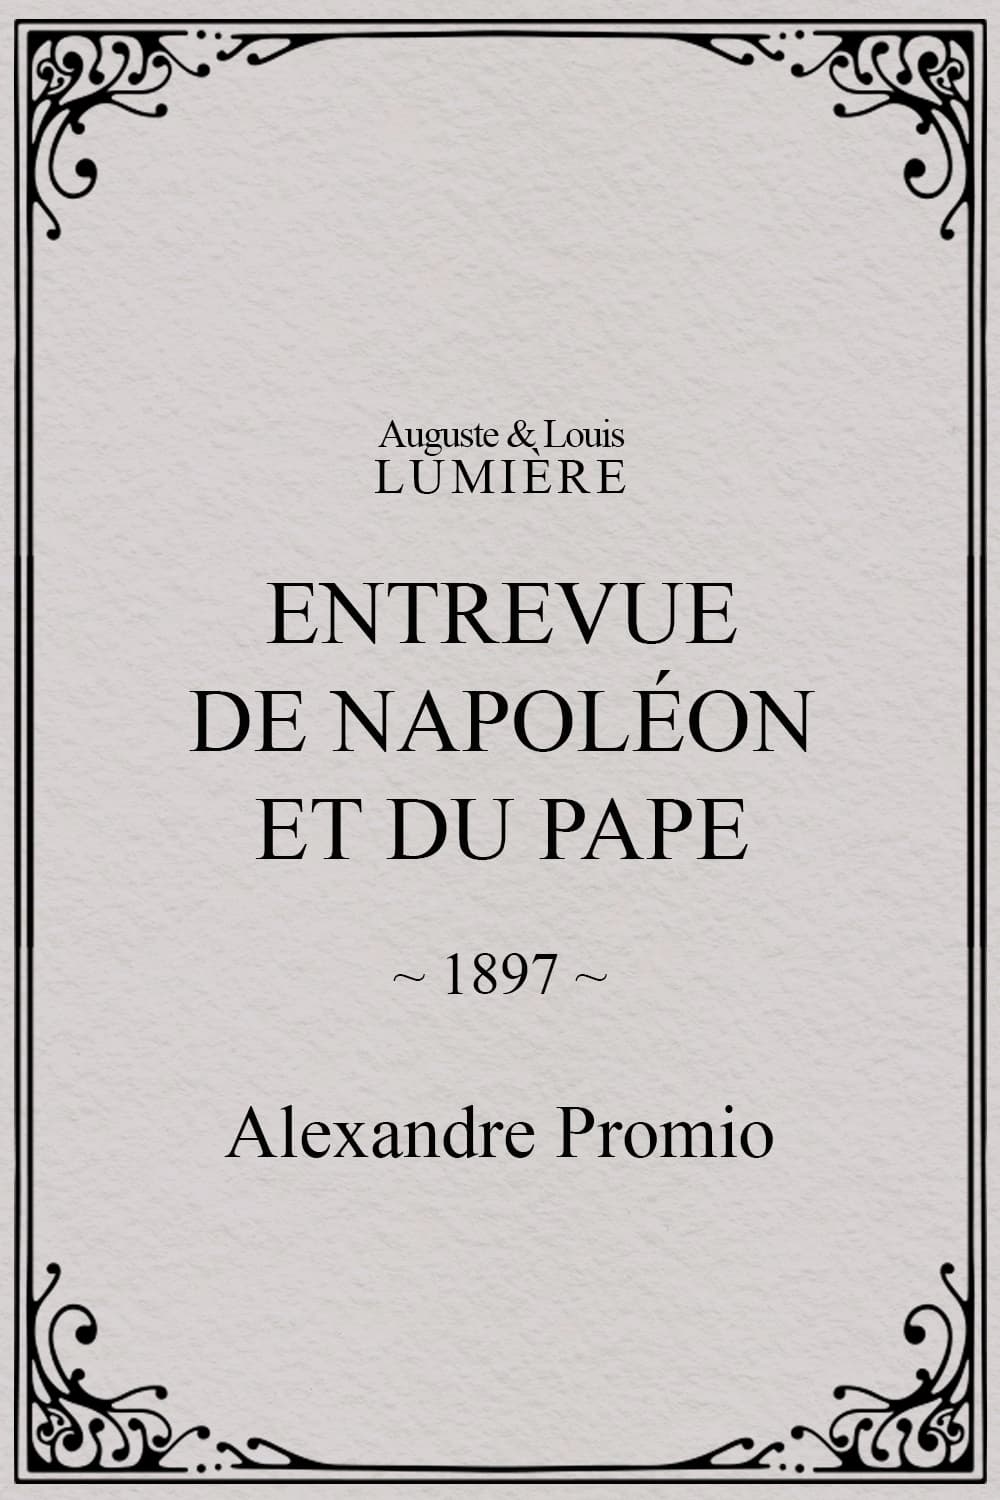 Interview Between Napoleon and the Pope (1897)